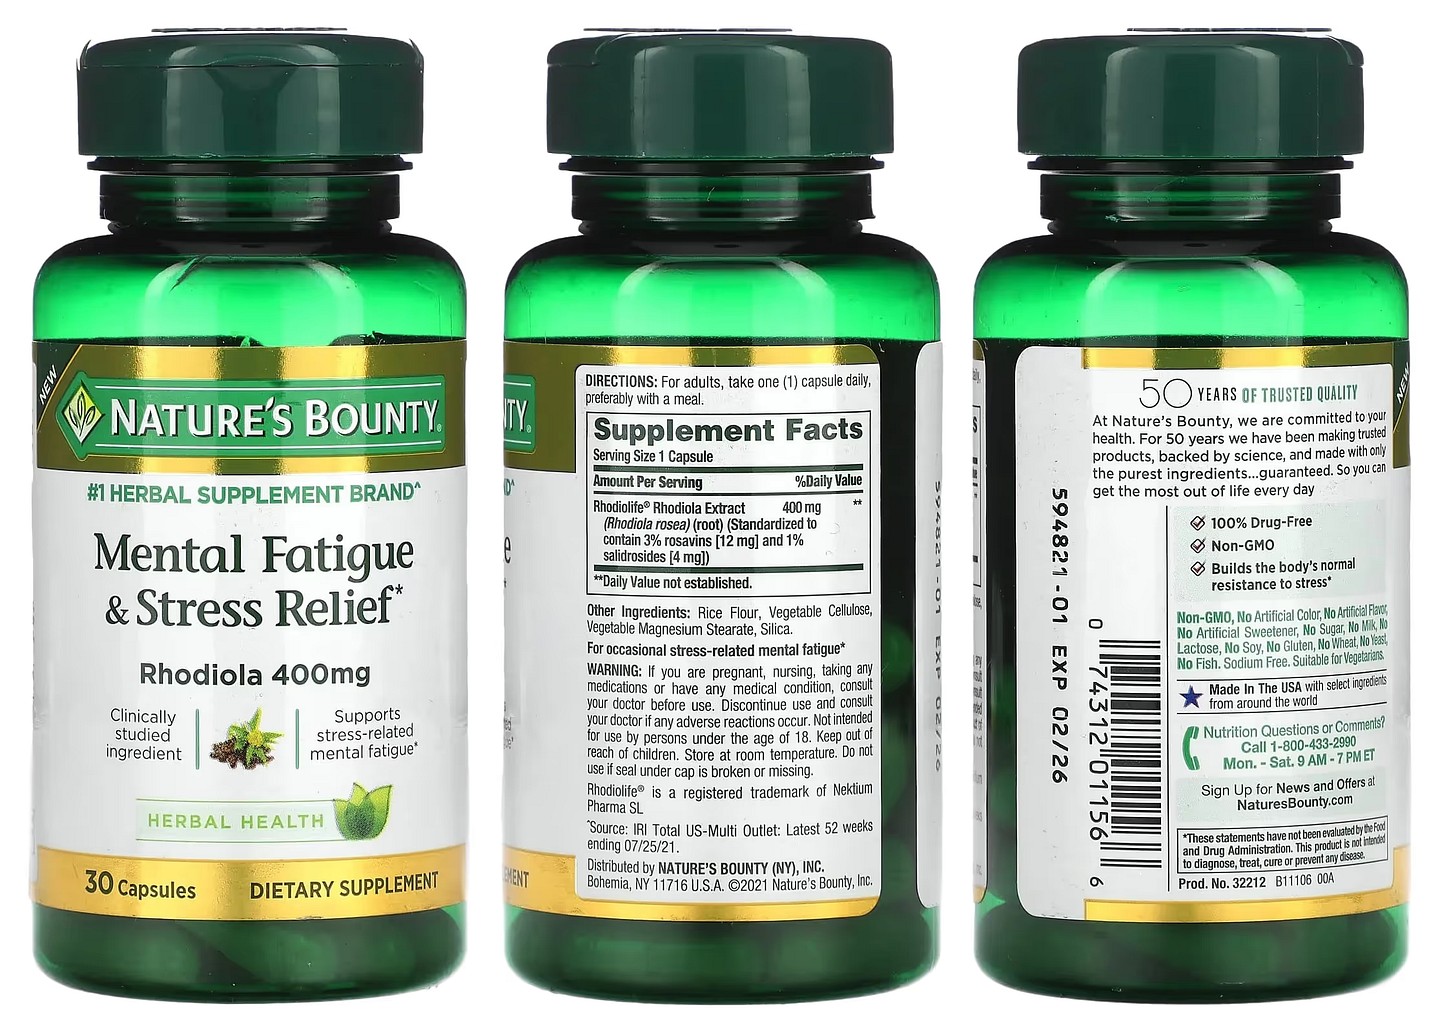 Nature's Bounty, Mental Fatigue & Stress Relief packaging